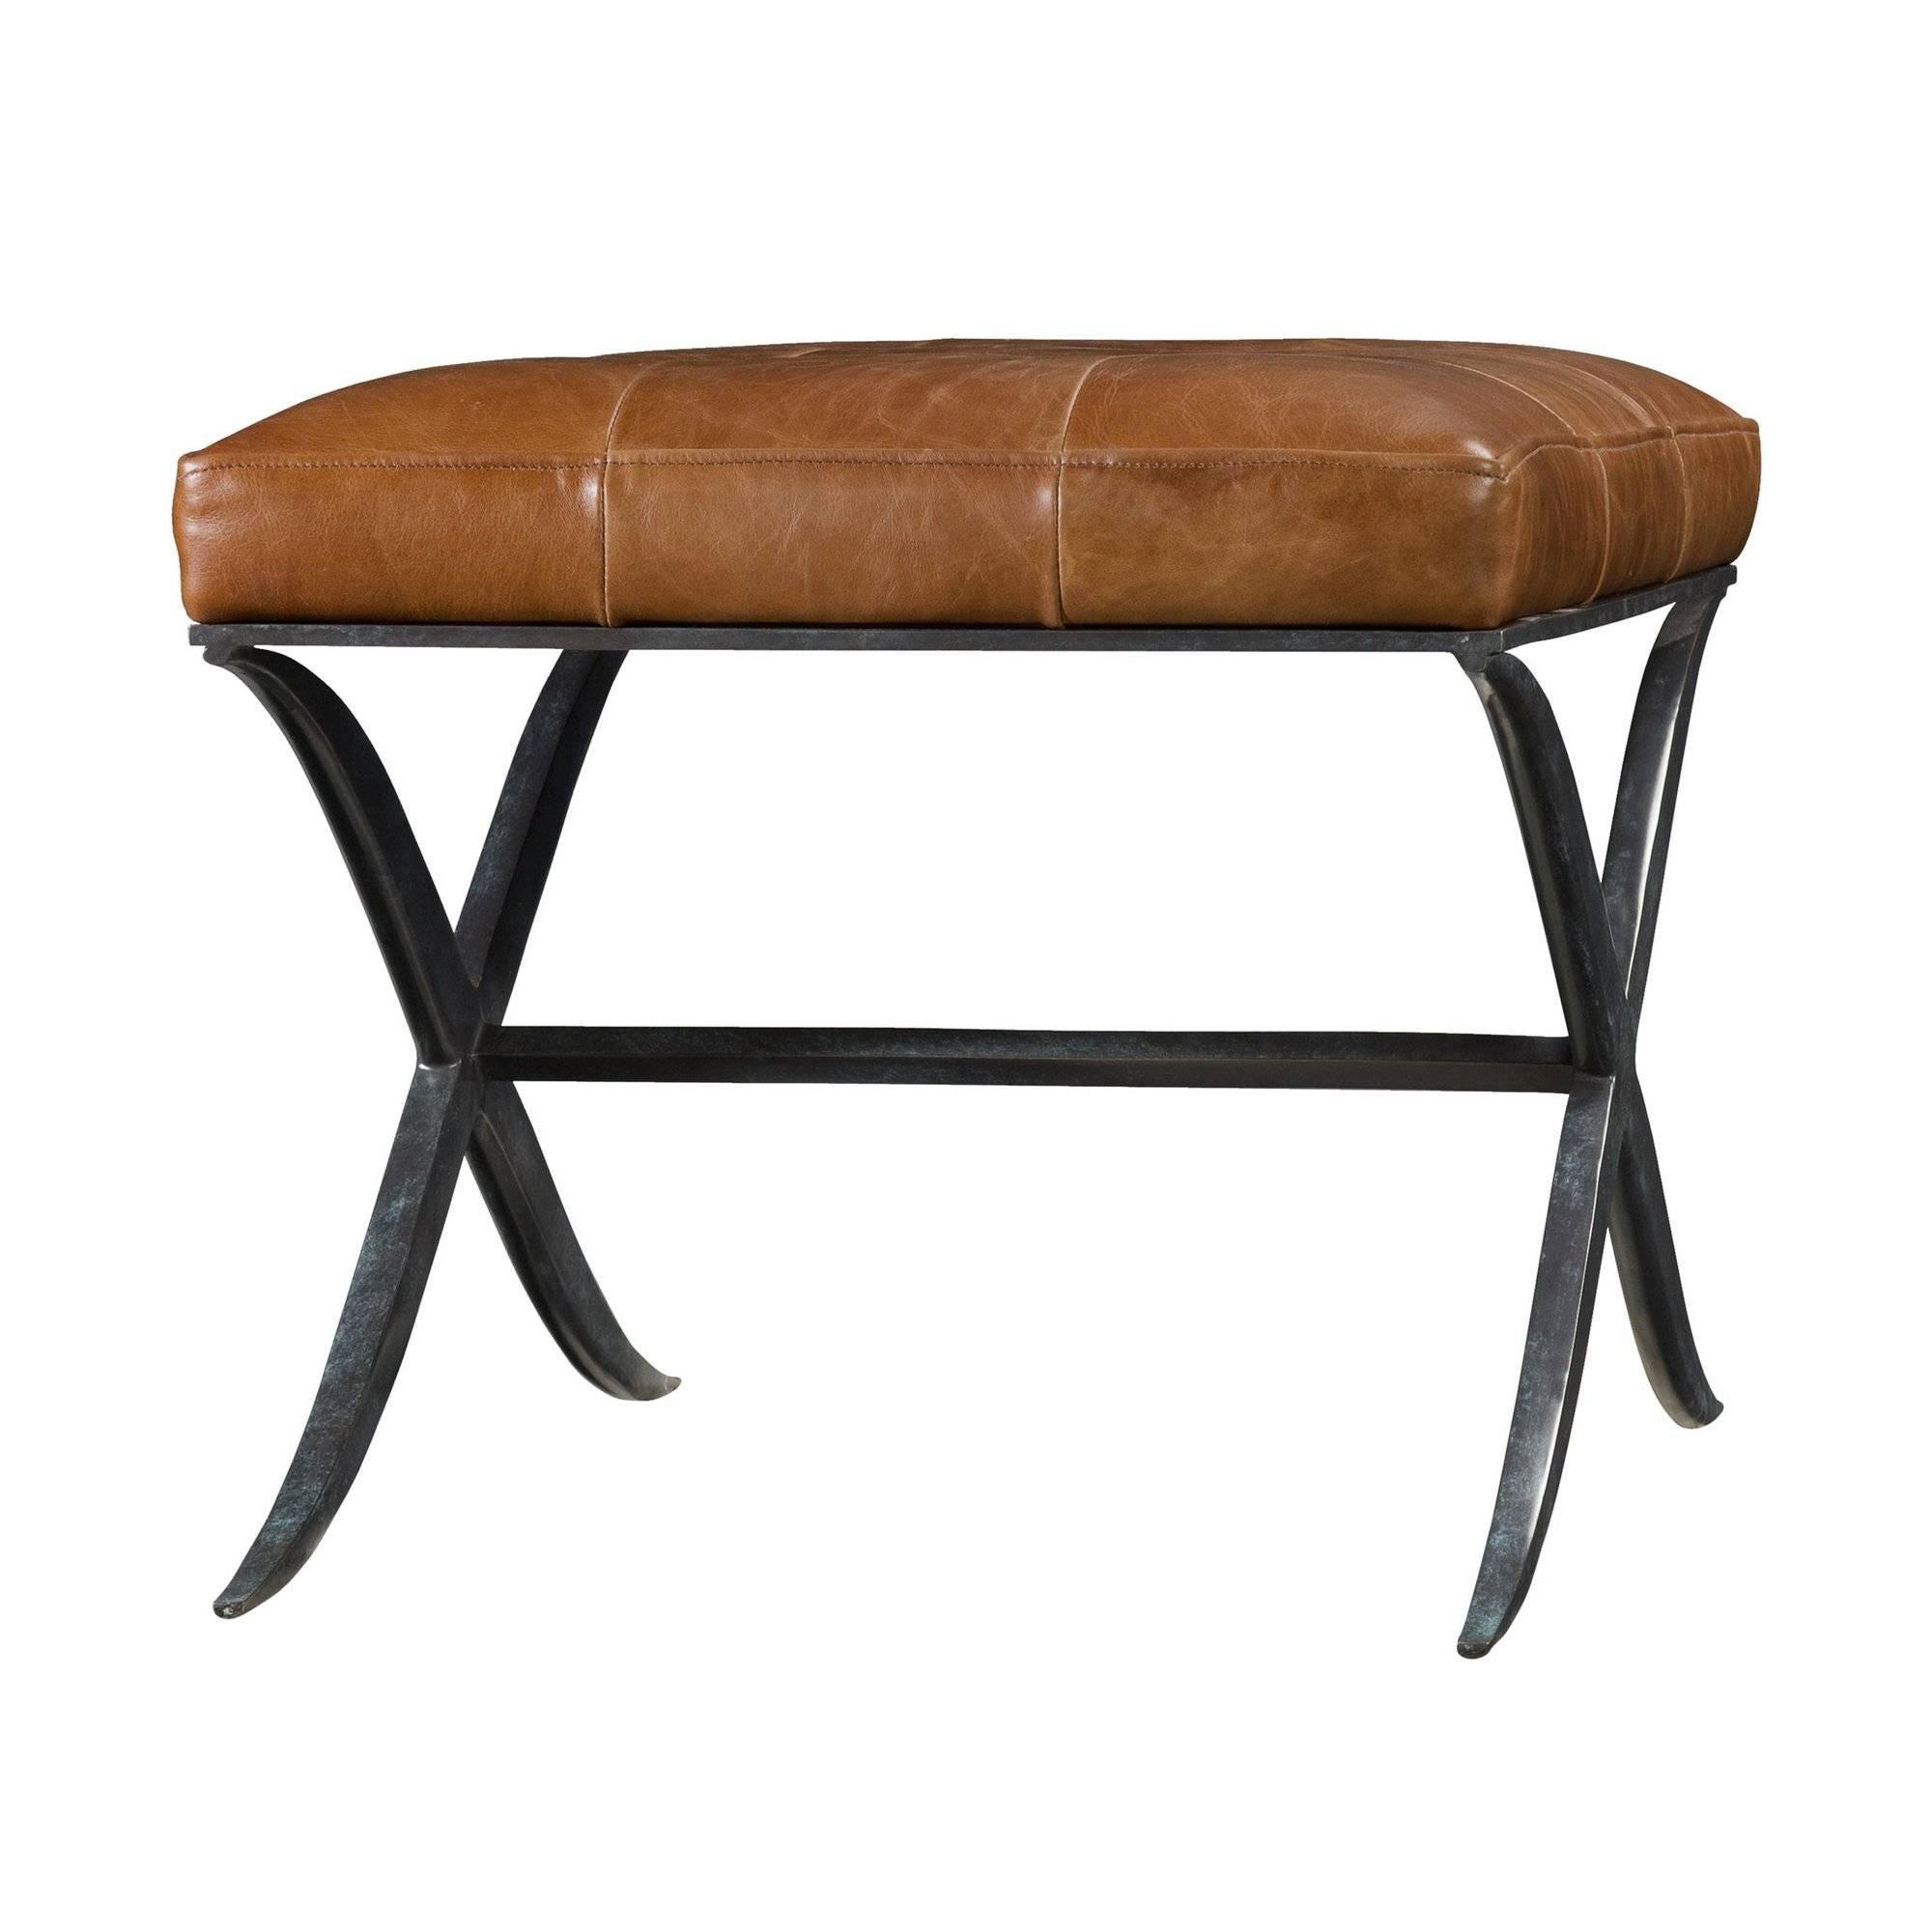 A sleek midcentury style steel and leather upholstered X-frame stool. With a striking verdigris steel X-frame base.